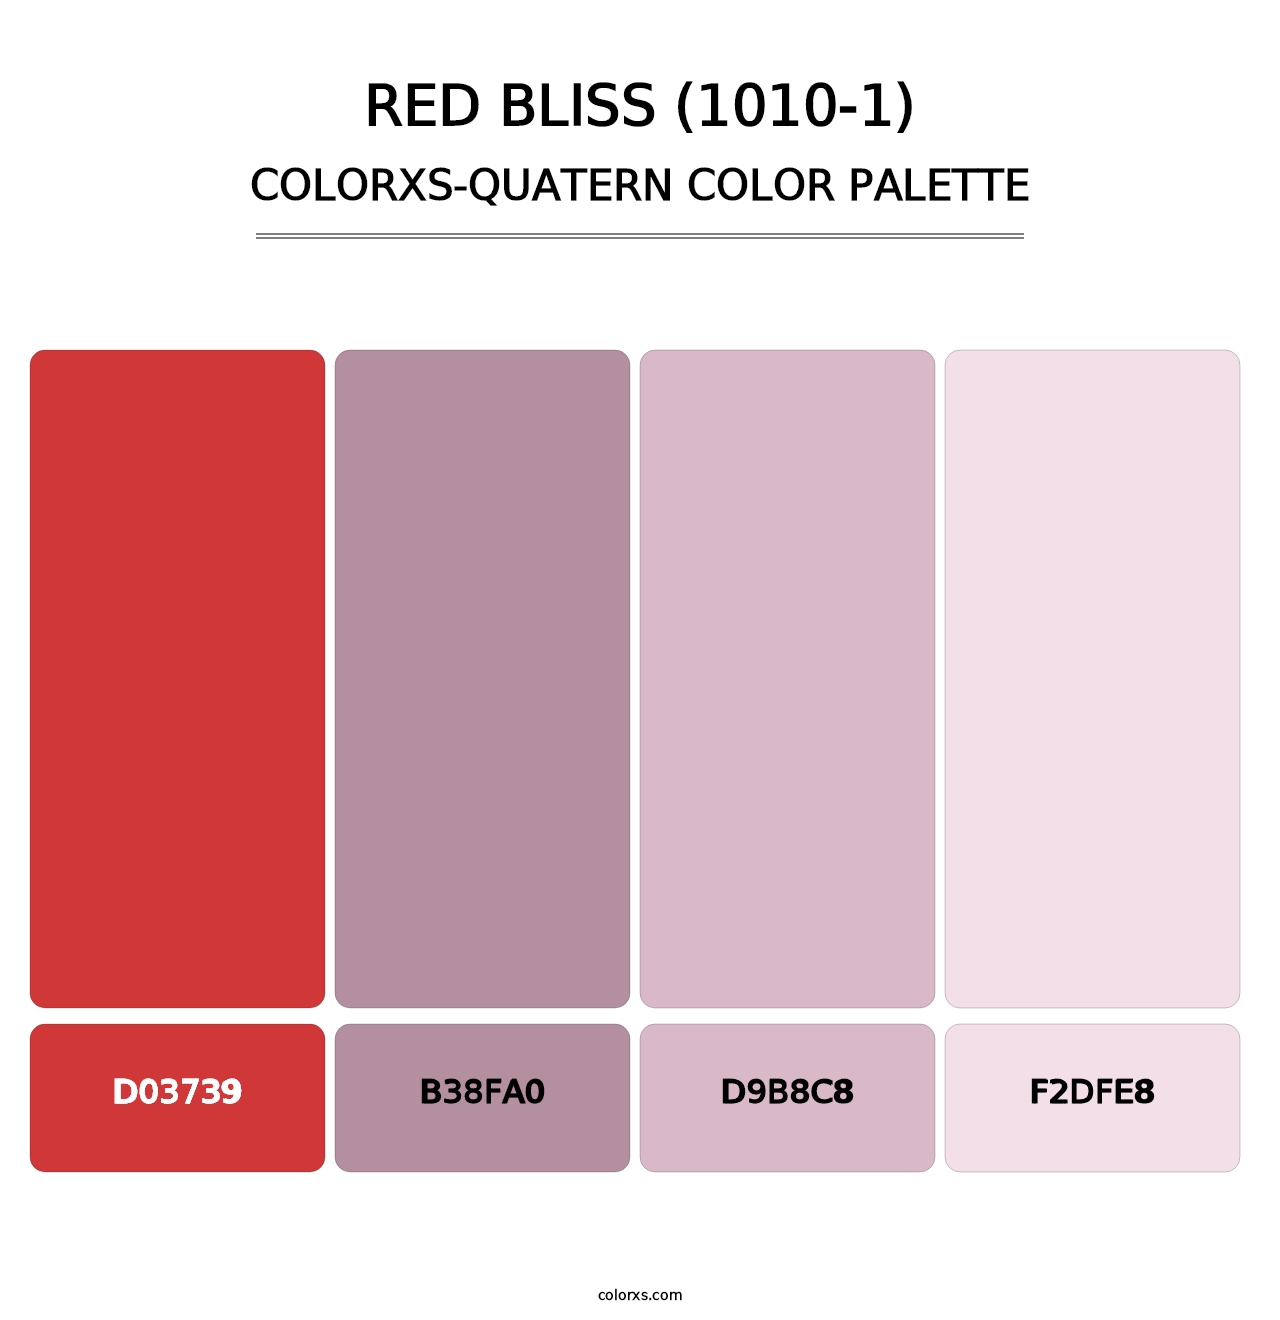 Red Bliss (1010-1) - Colorxs Quatern Palette